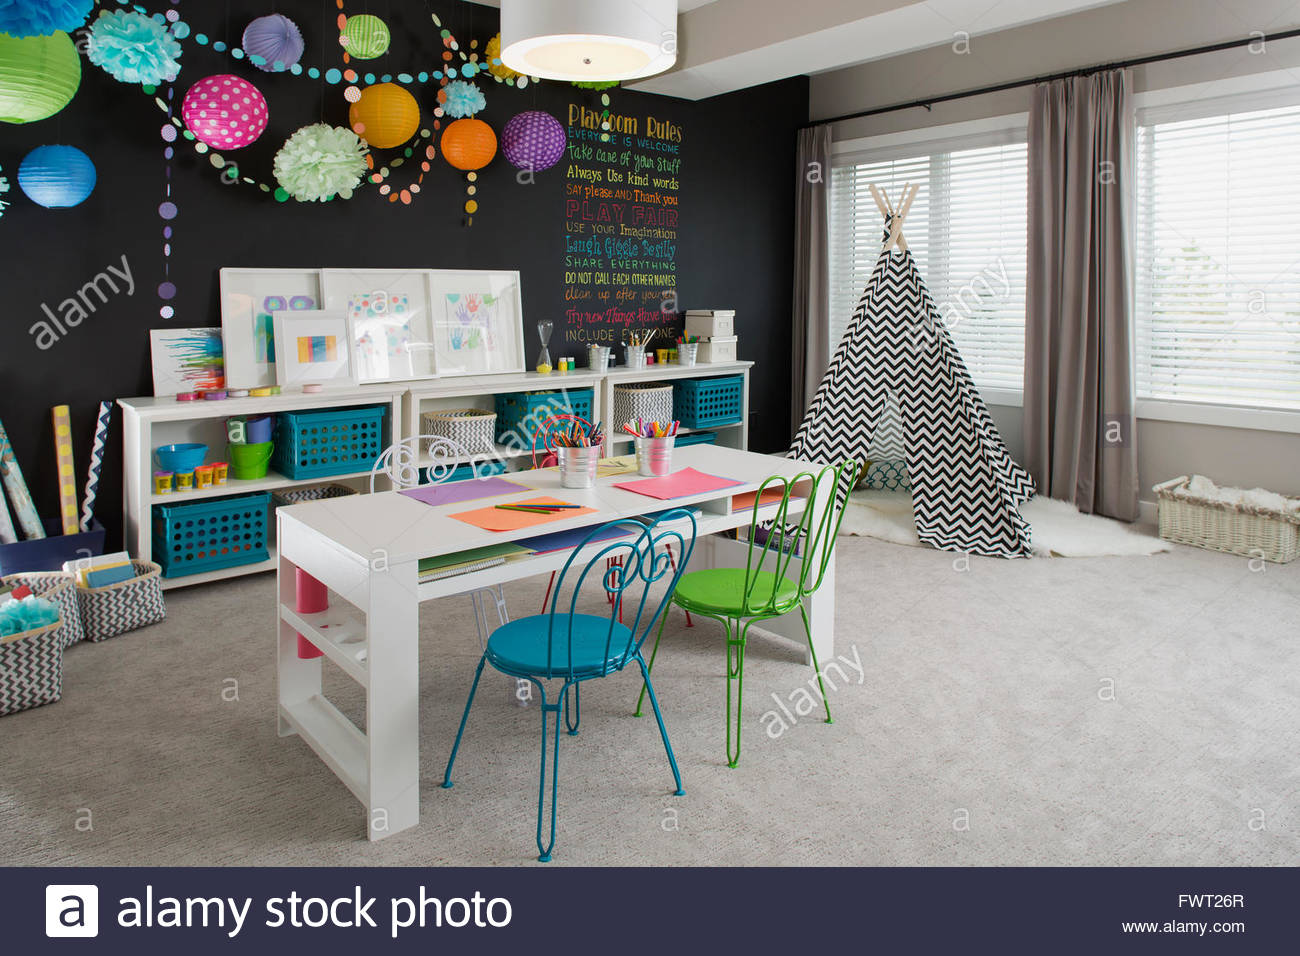 Interior of playroom in house Stock Photo